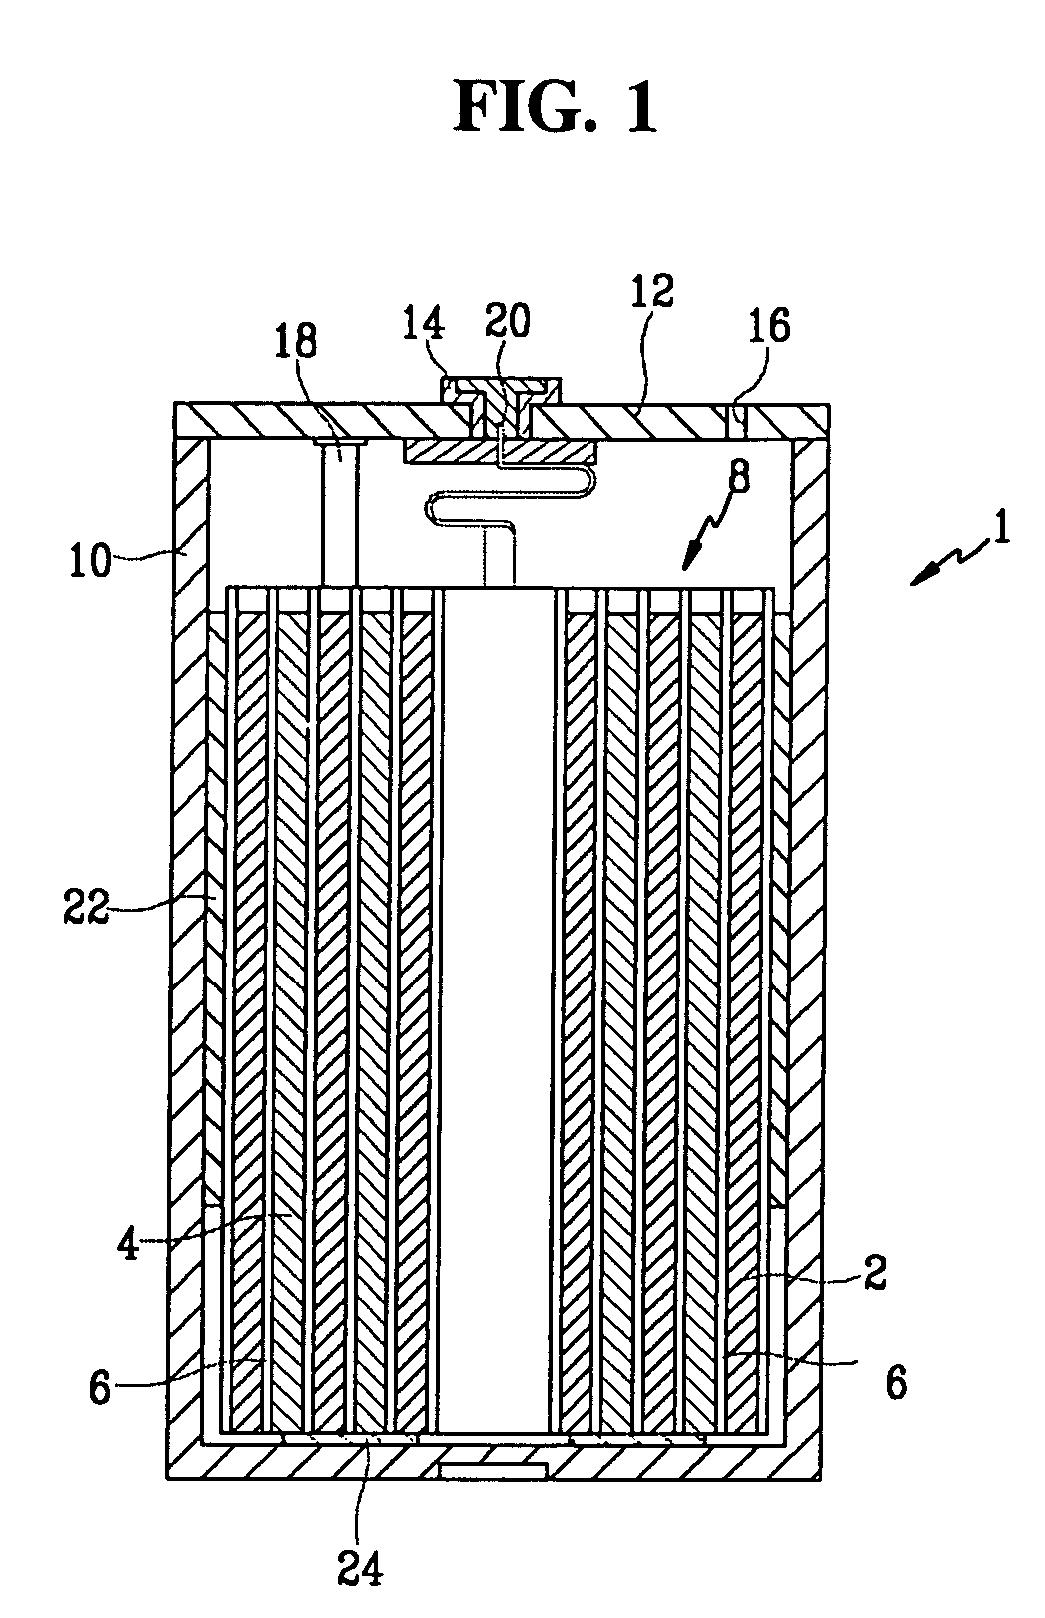 Nonaqueous electrolytic solution with improved safety and lithium battery employing the same